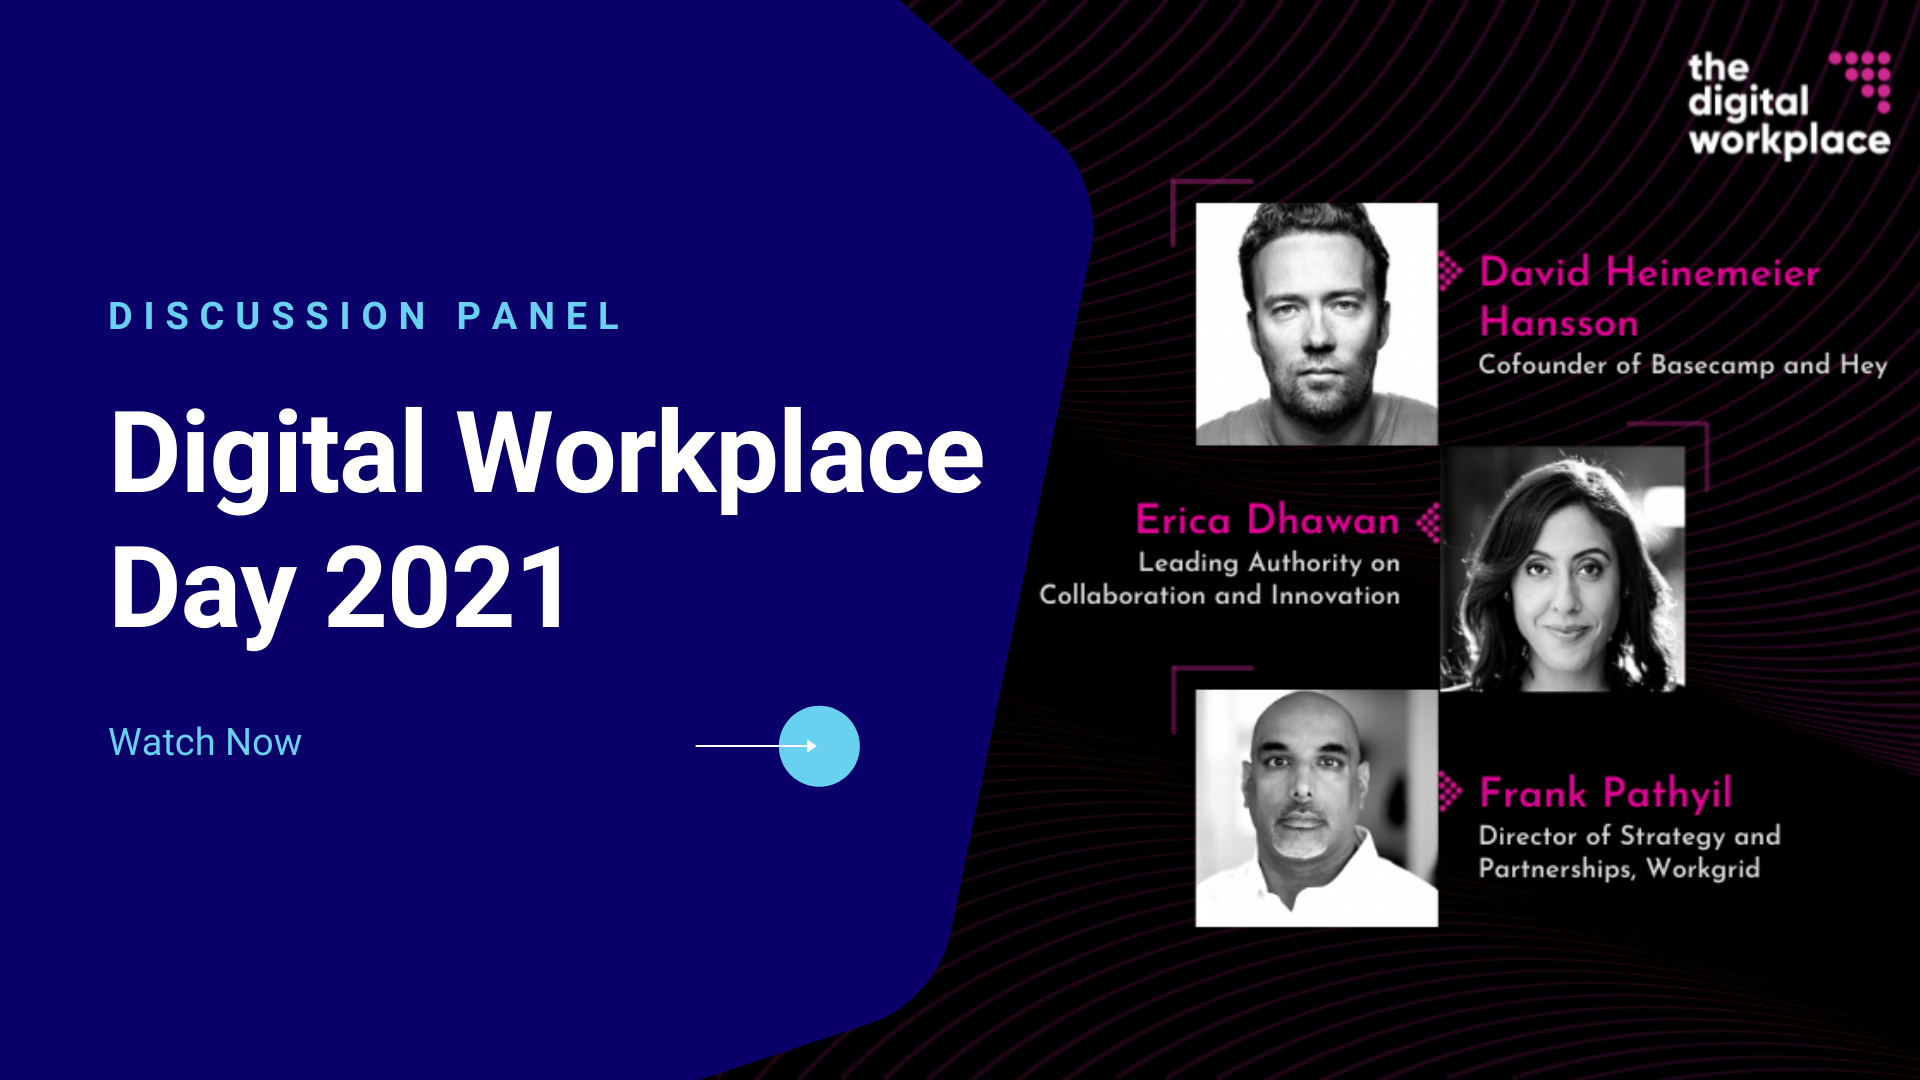 The Digital Workplace Day panel discusses how the digital workplace has changed and what it will take for organizations to deliver great digital collaboration. 